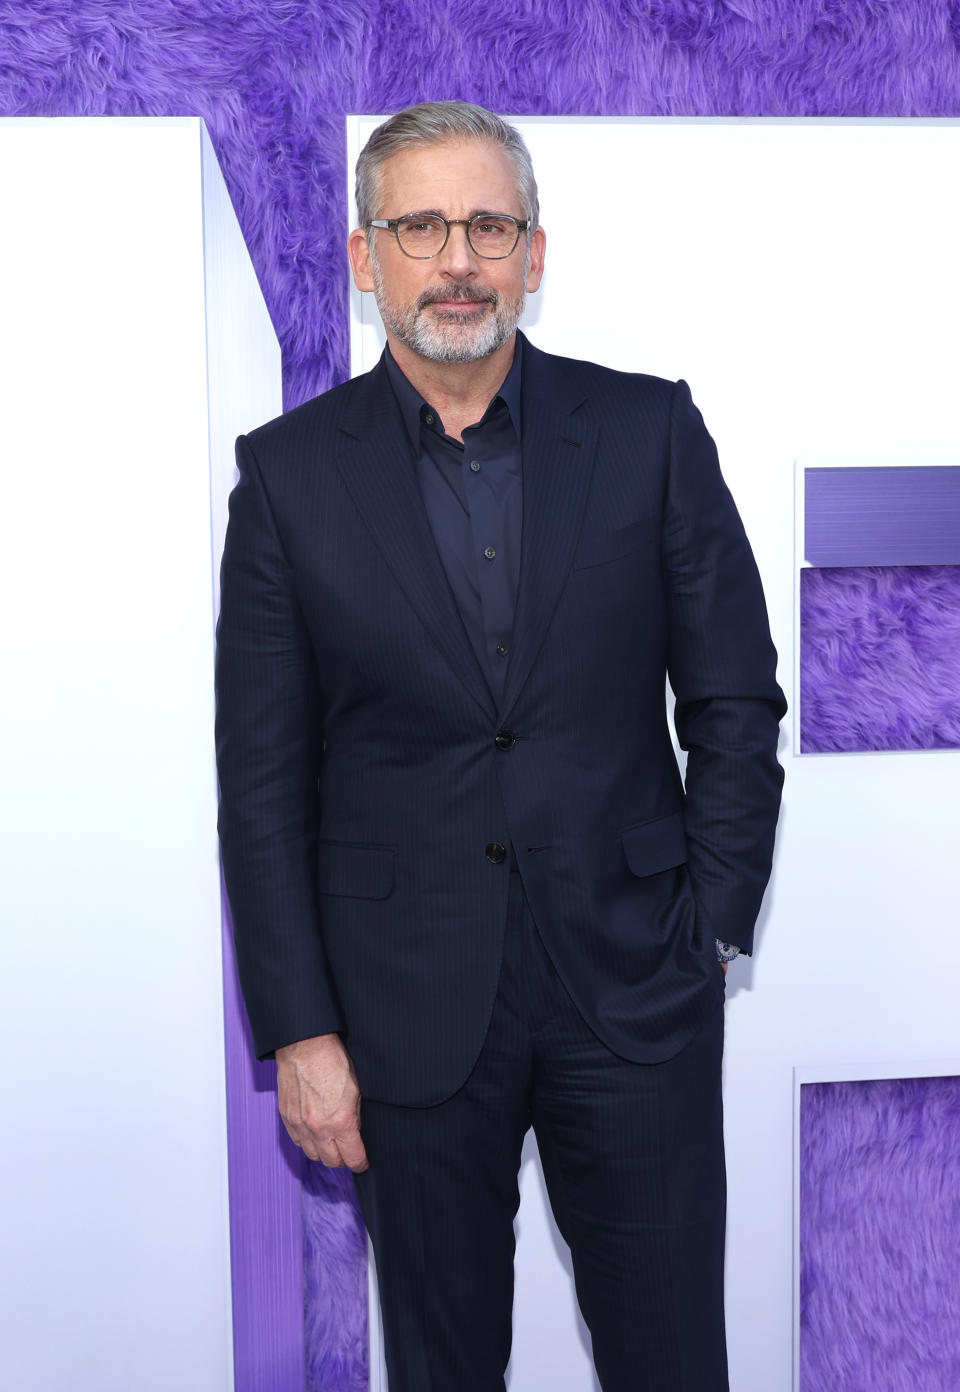 Steve Carell in a black, pinstripe suit and glasses at an event